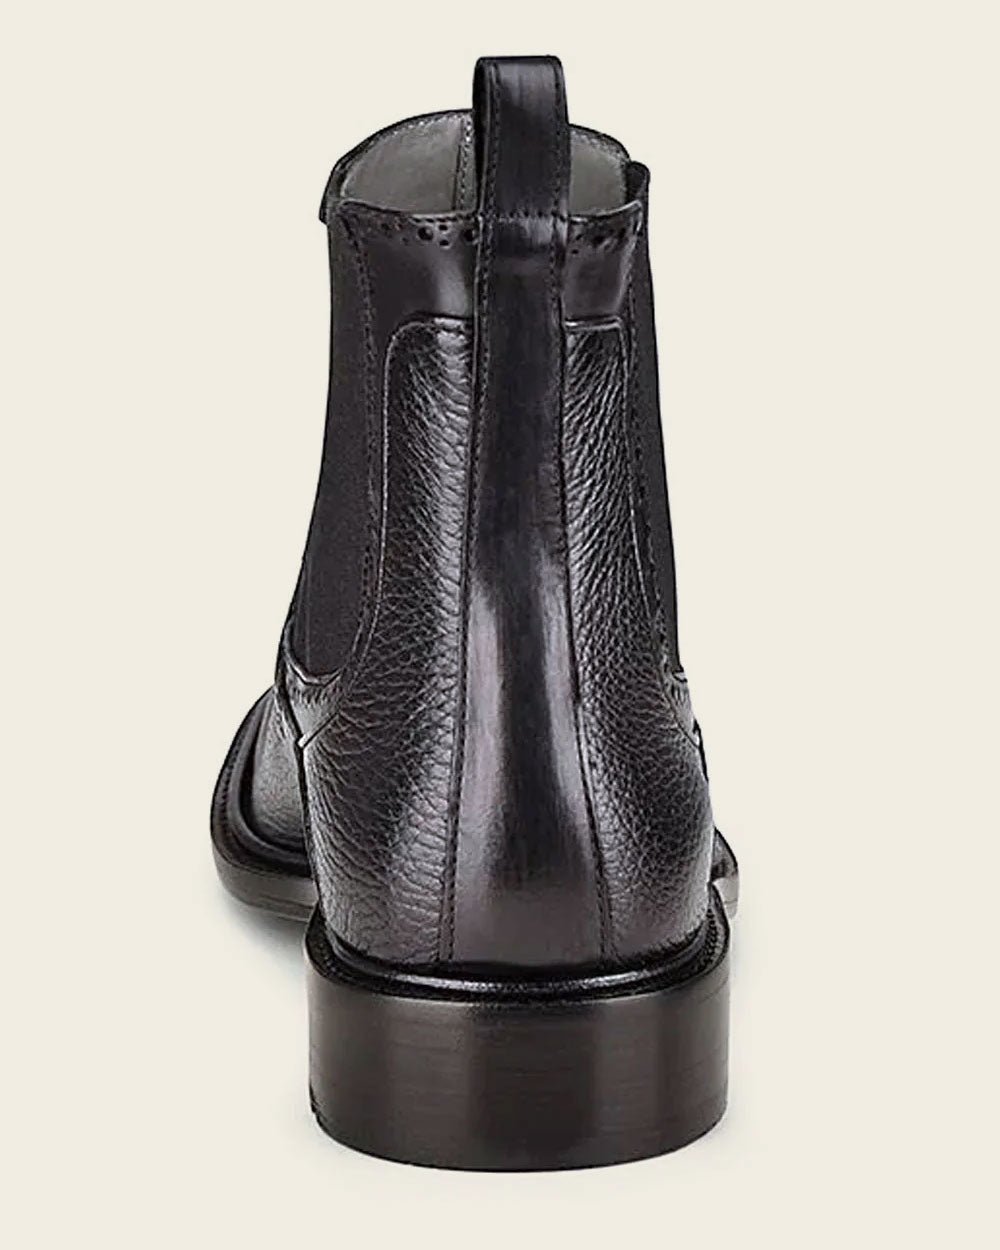 Indulge in the luxury of genuine deer leather and elevate your footwear game with franco cuadra's Black deer leather Chelsea boots. Its combination of softness, style, and attention to detail ensures that you'll step out in confidence and comfort.